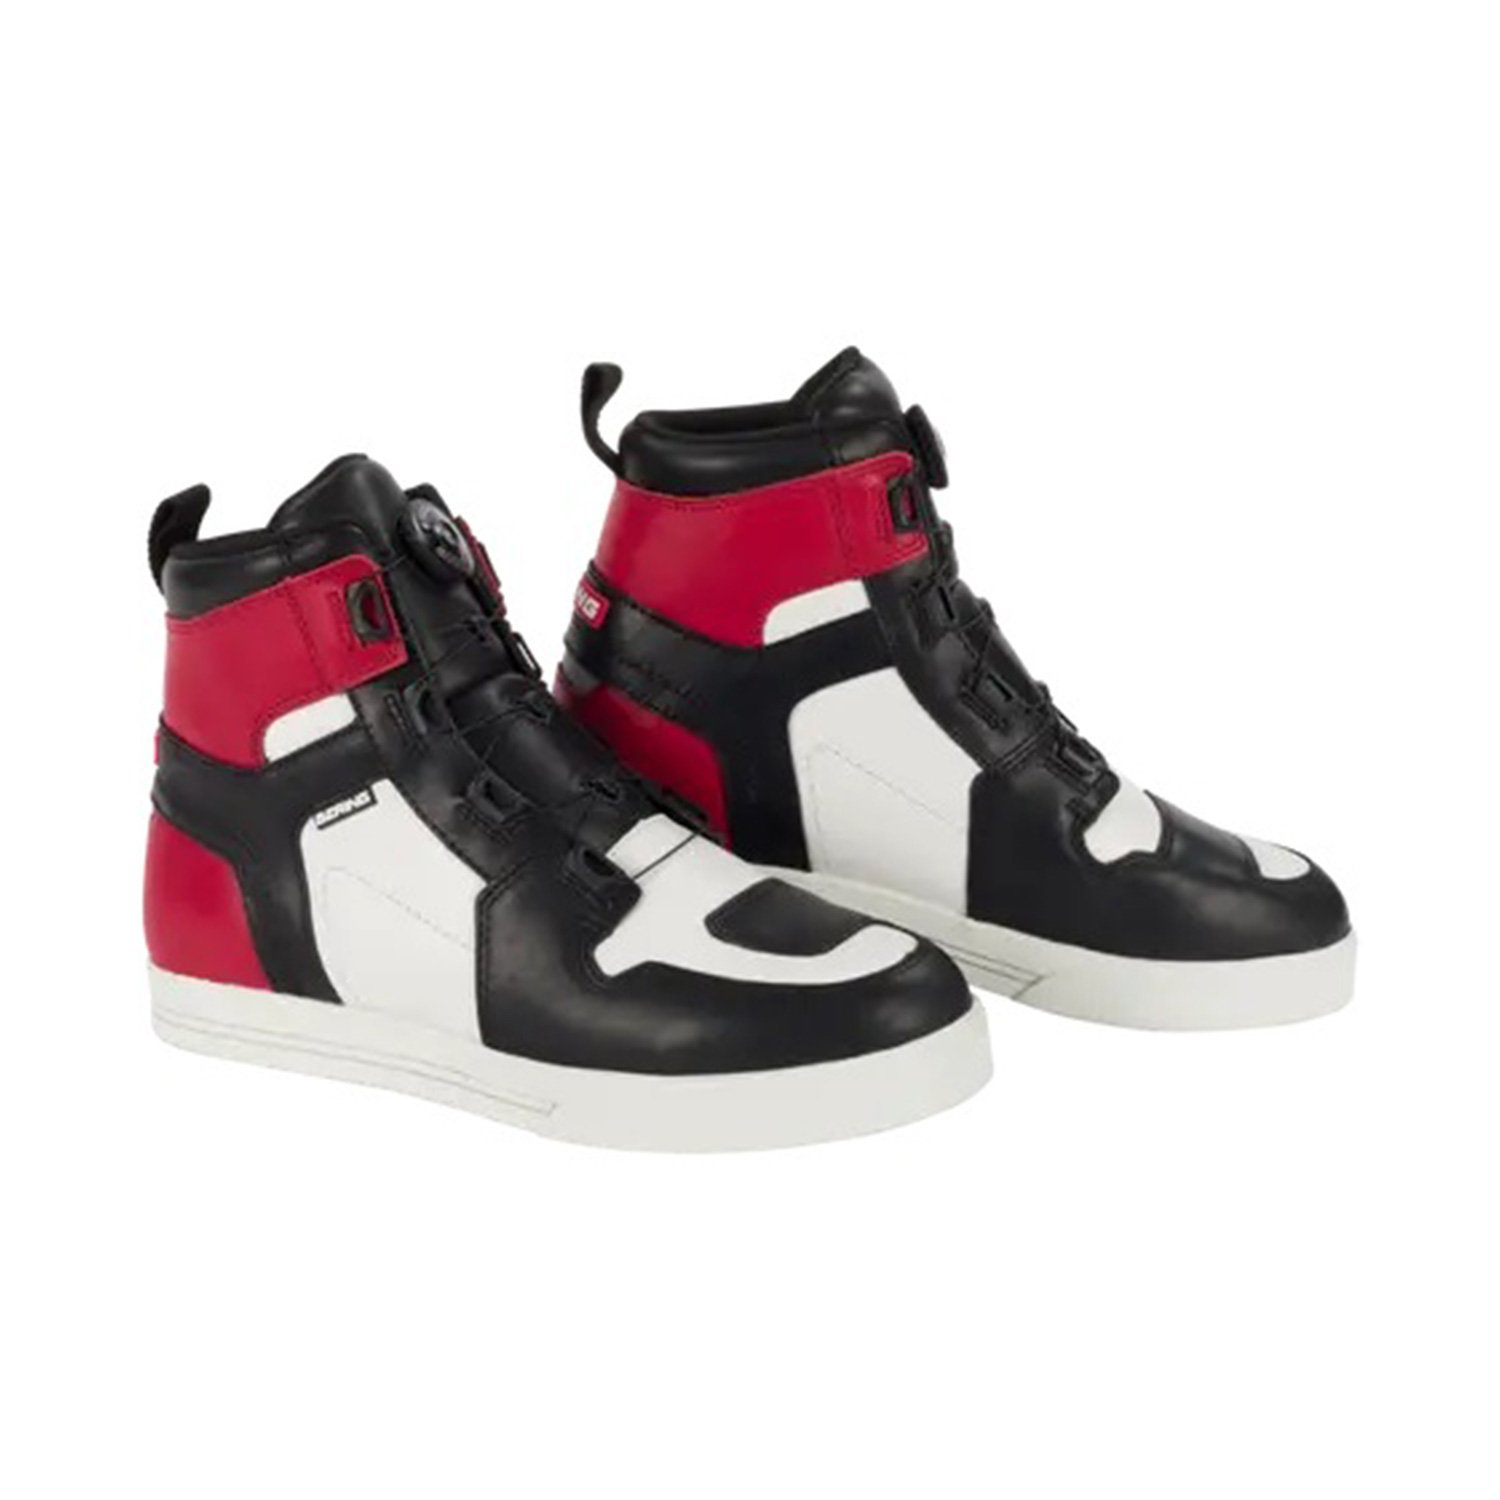 Image of Bering Sneakers Reflex A-Top Black White Red Size 42 EN